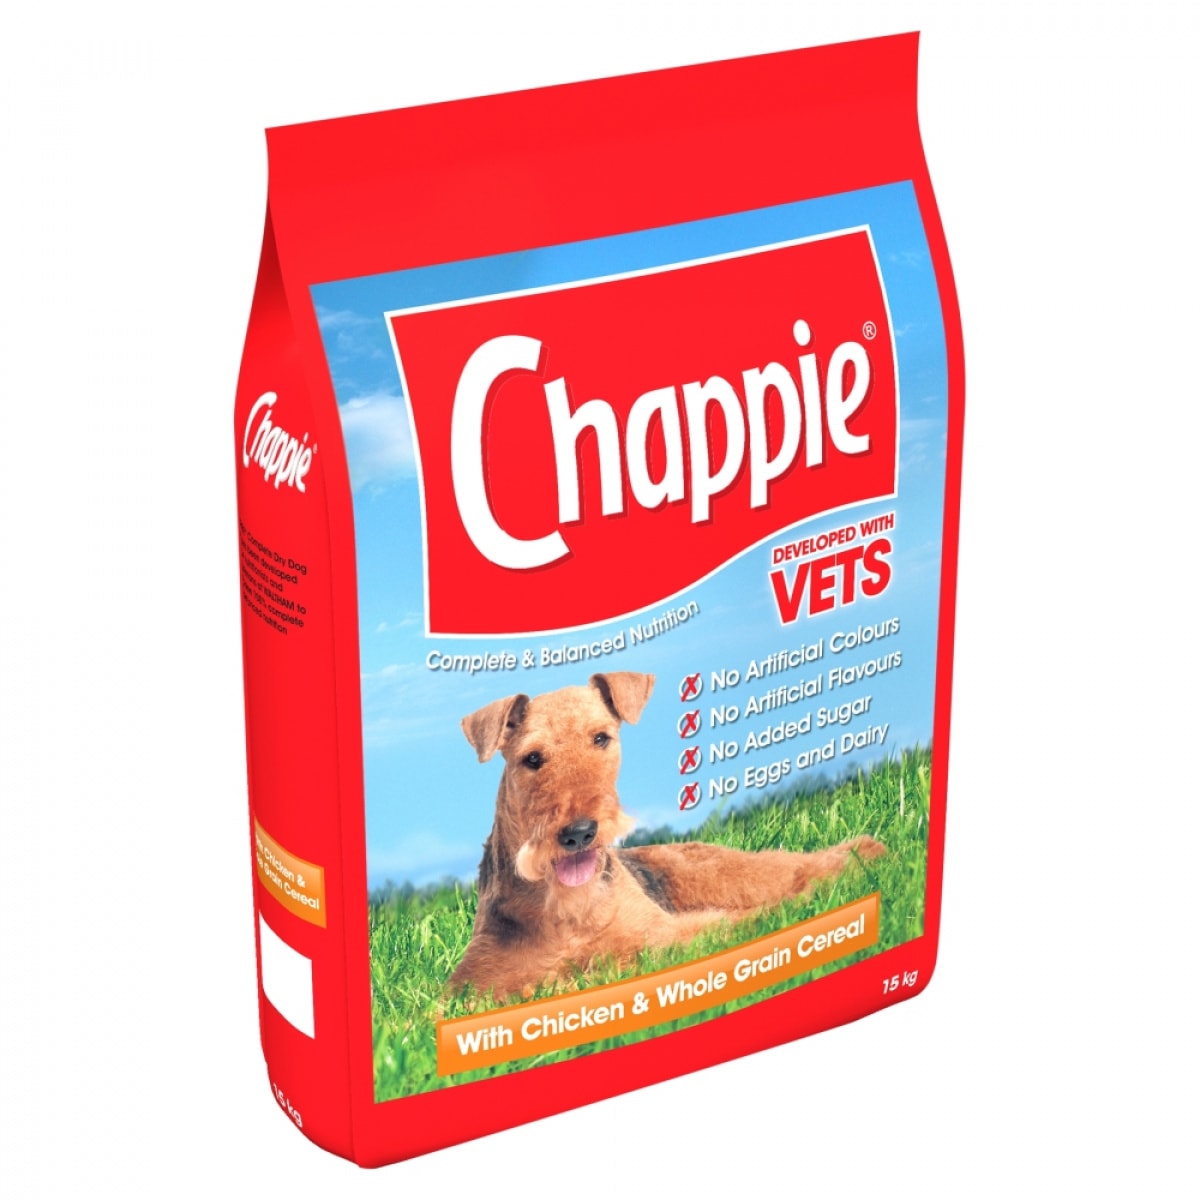 Chappie Chicken & Wholegrain Cereal – Pawfect Supplies Ltd Product Image